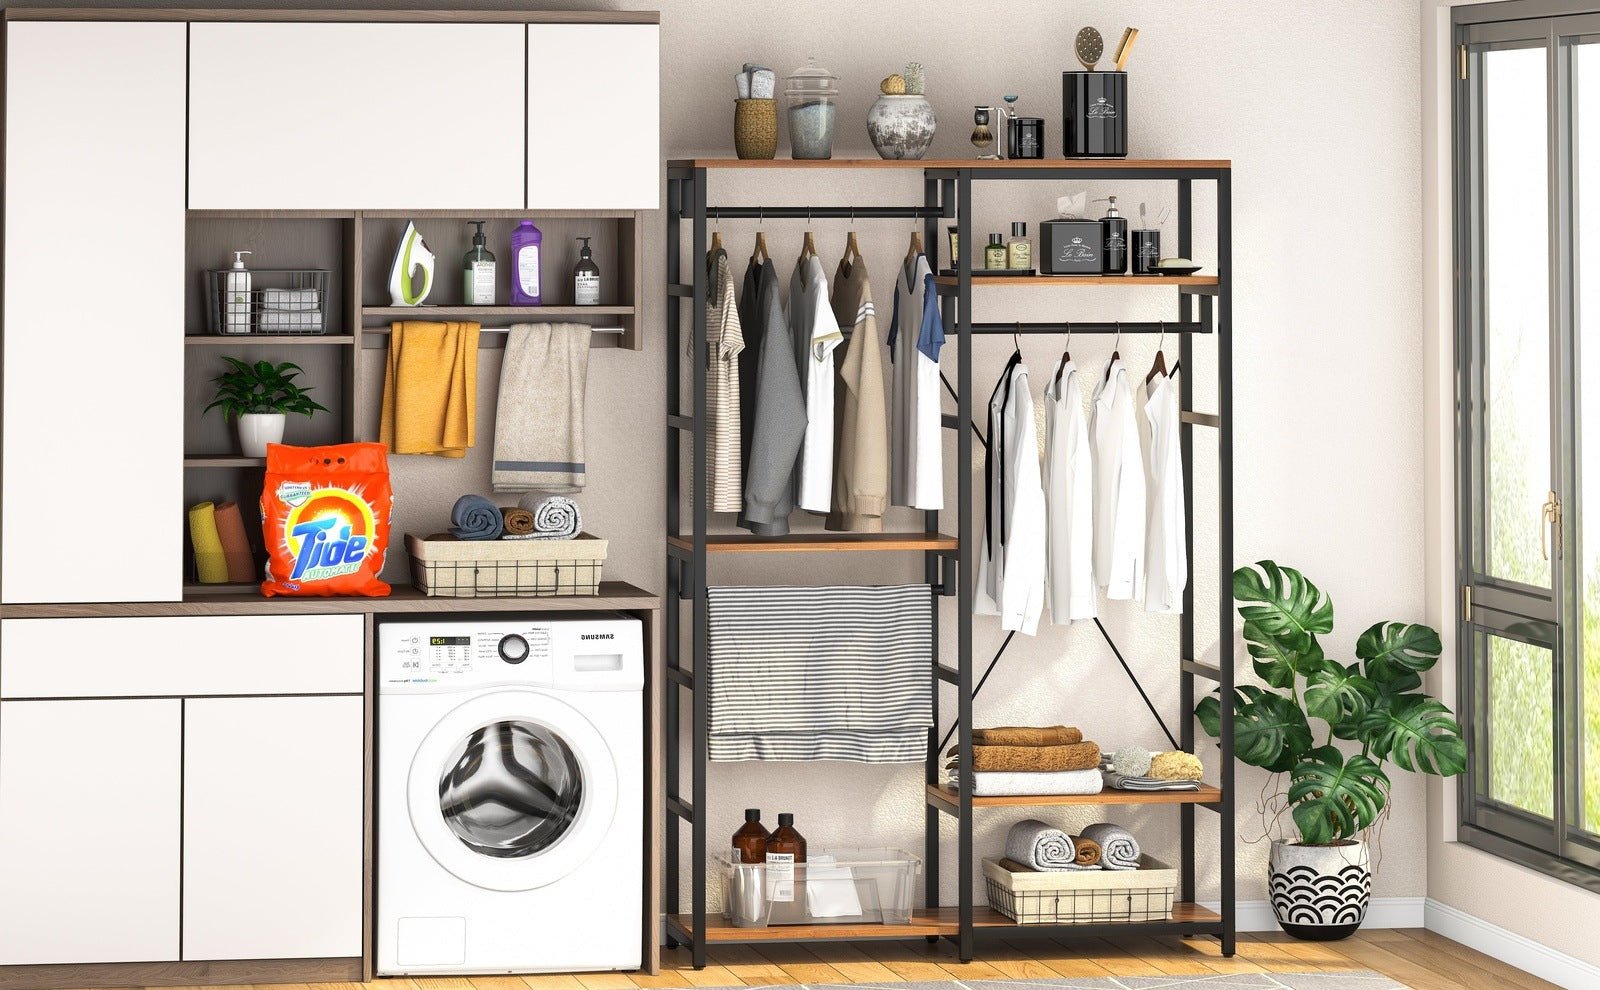 16 Smart Closet Organization Ideas for your bedroom of 2022 - Tribesigns